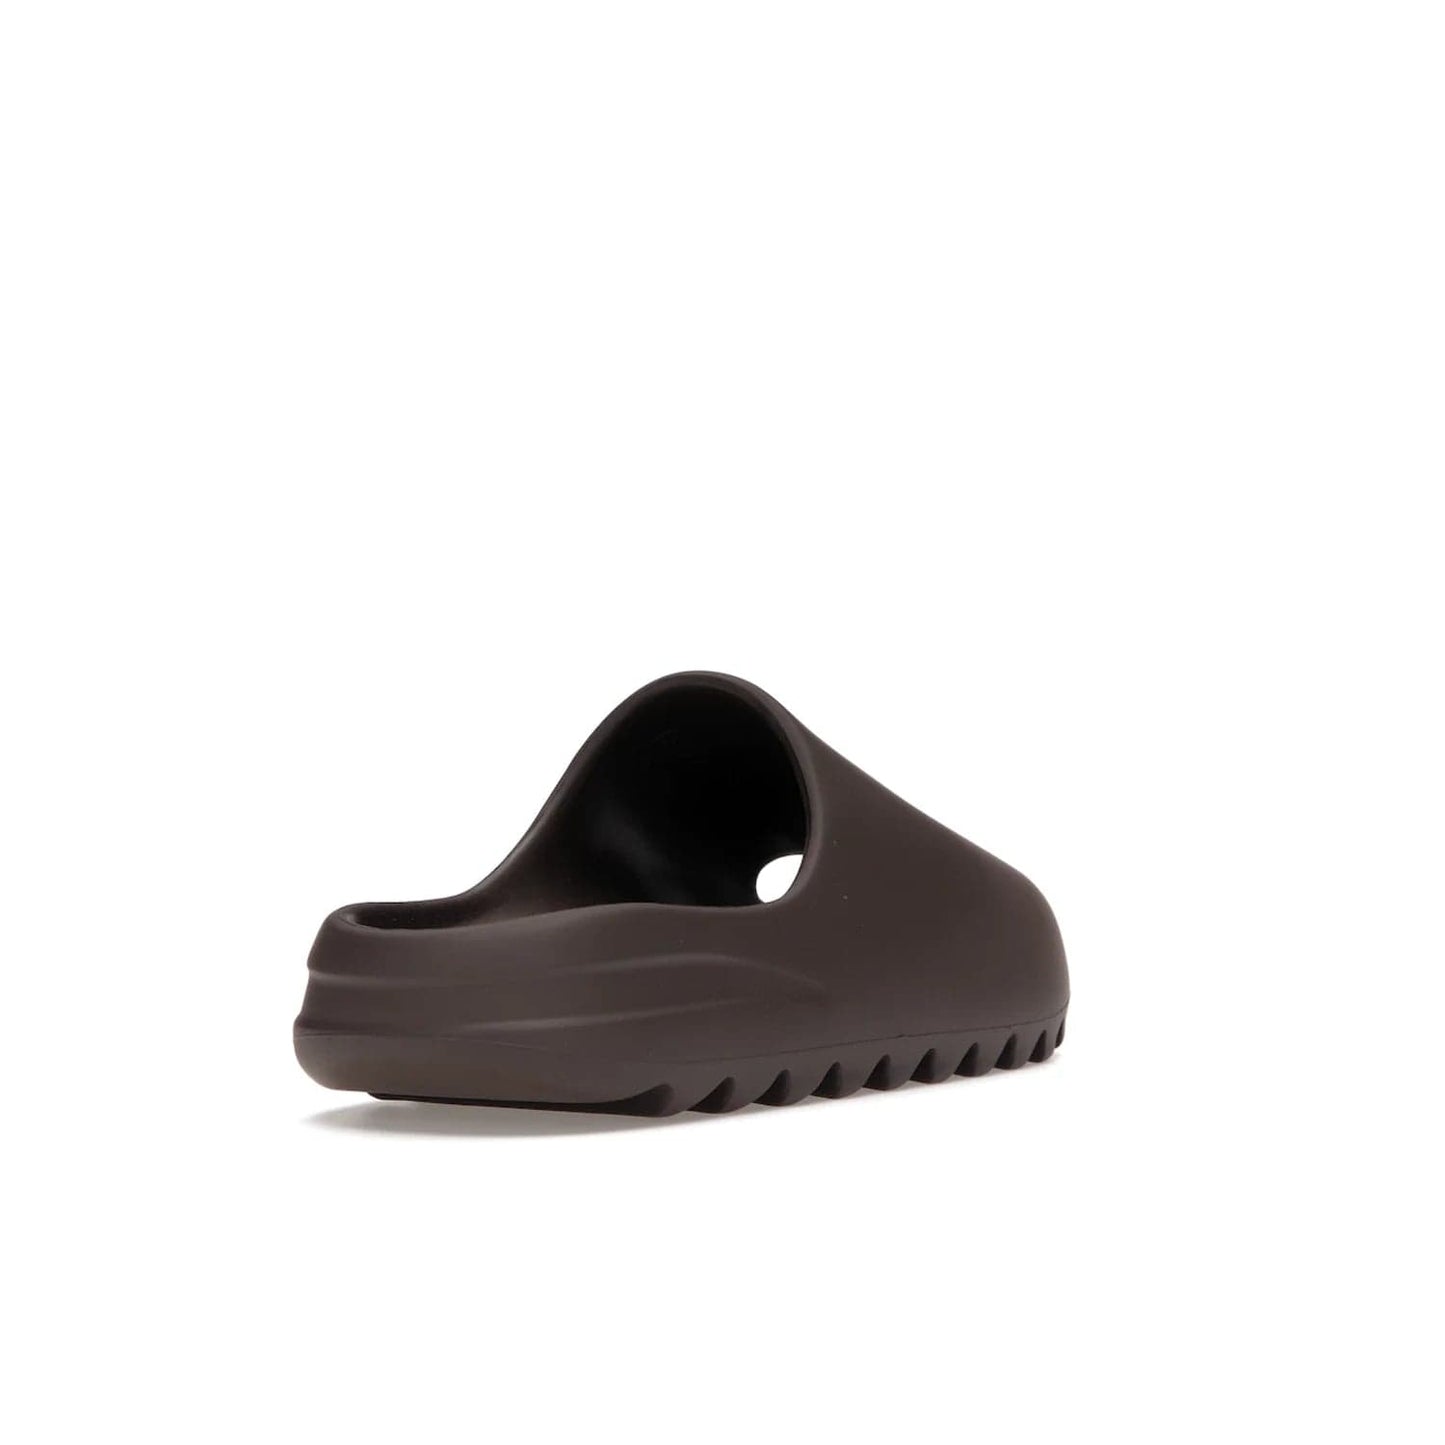 adidas Yeezy Slide Soot - Image 31 - Only at www.BallersClubKickz.com - Shop the Yeezy Slide Soot sneaker by Adidas, a sleek blend of form and function. Monochrome silhouette in Soot/Soot/Soot. Lightweight EVA foam offers comfort and durability. Get the must-have style today.